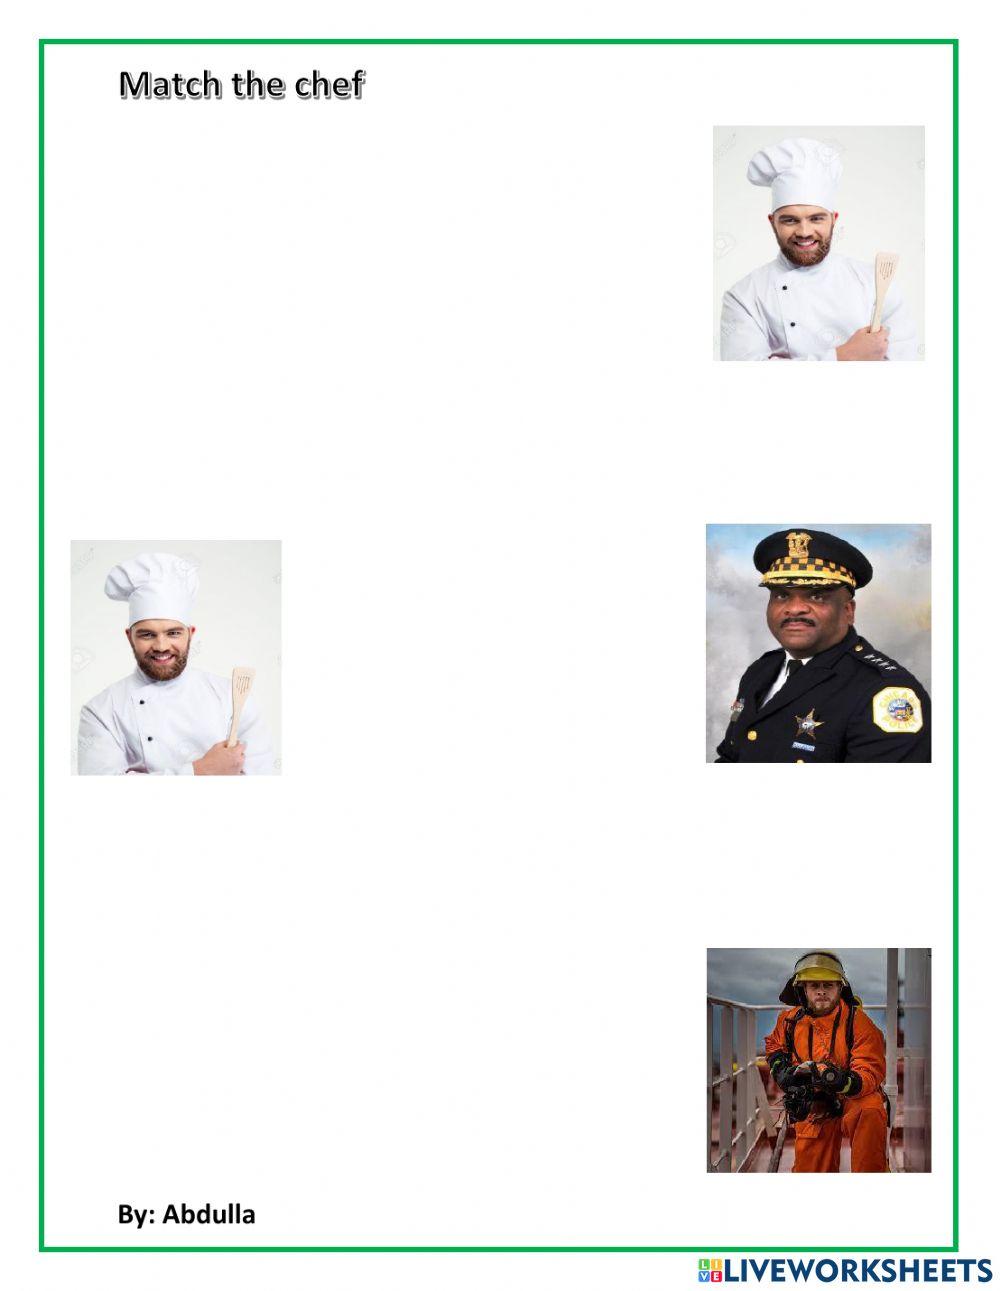 Match the chef